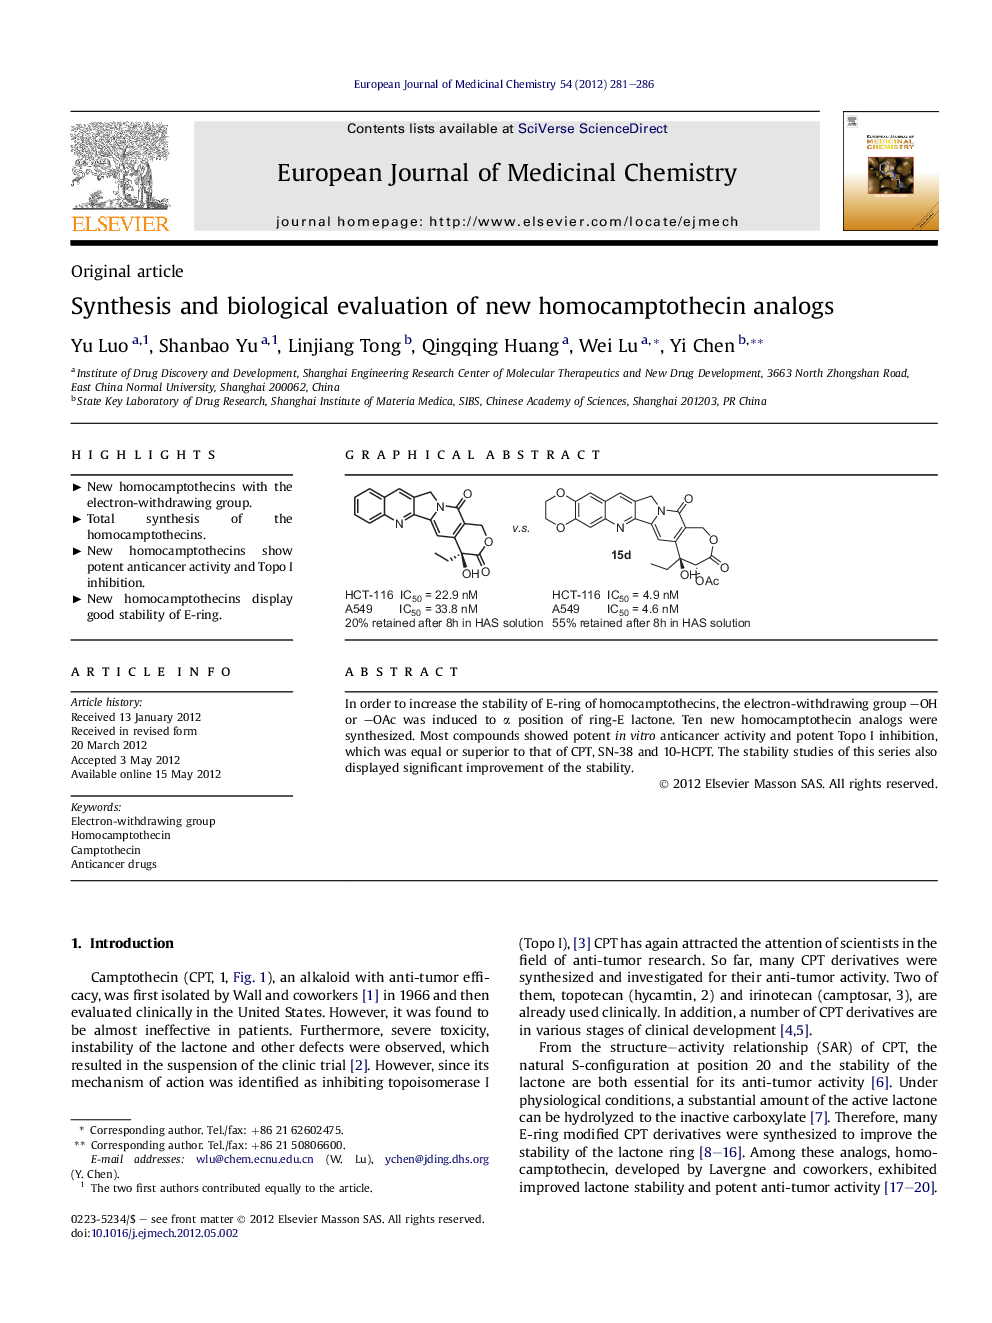 Synthesis and biological evaluation of new homocamptothecin analogs